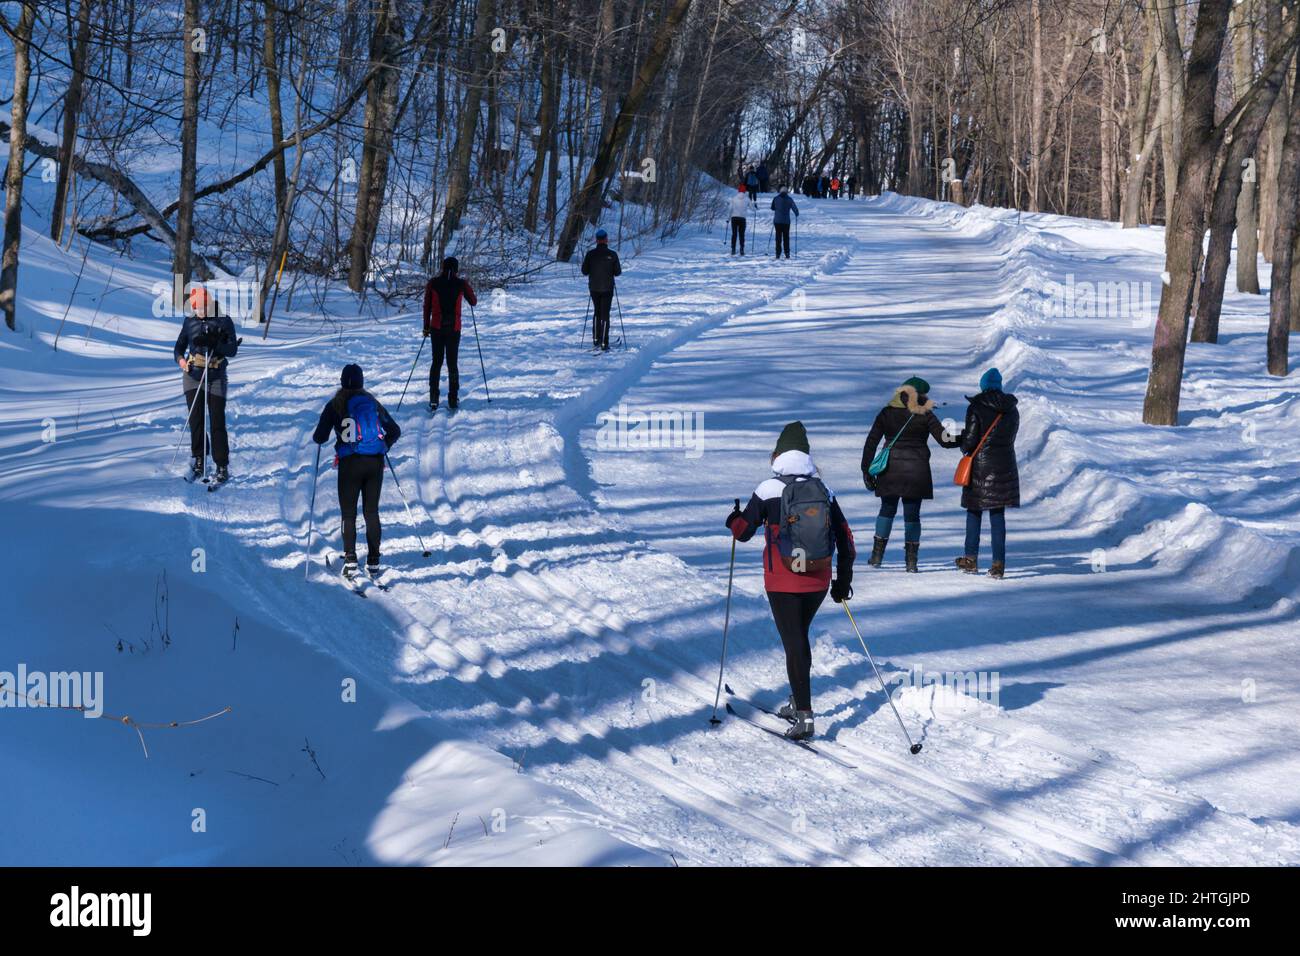 Montreal, CA - 26 February 2022: People walking or skiing on a snowy trail  in Montreal's Mount Royal Park (Parc Du Mont-Royal) after snow storm Stock  Photo - Alamy